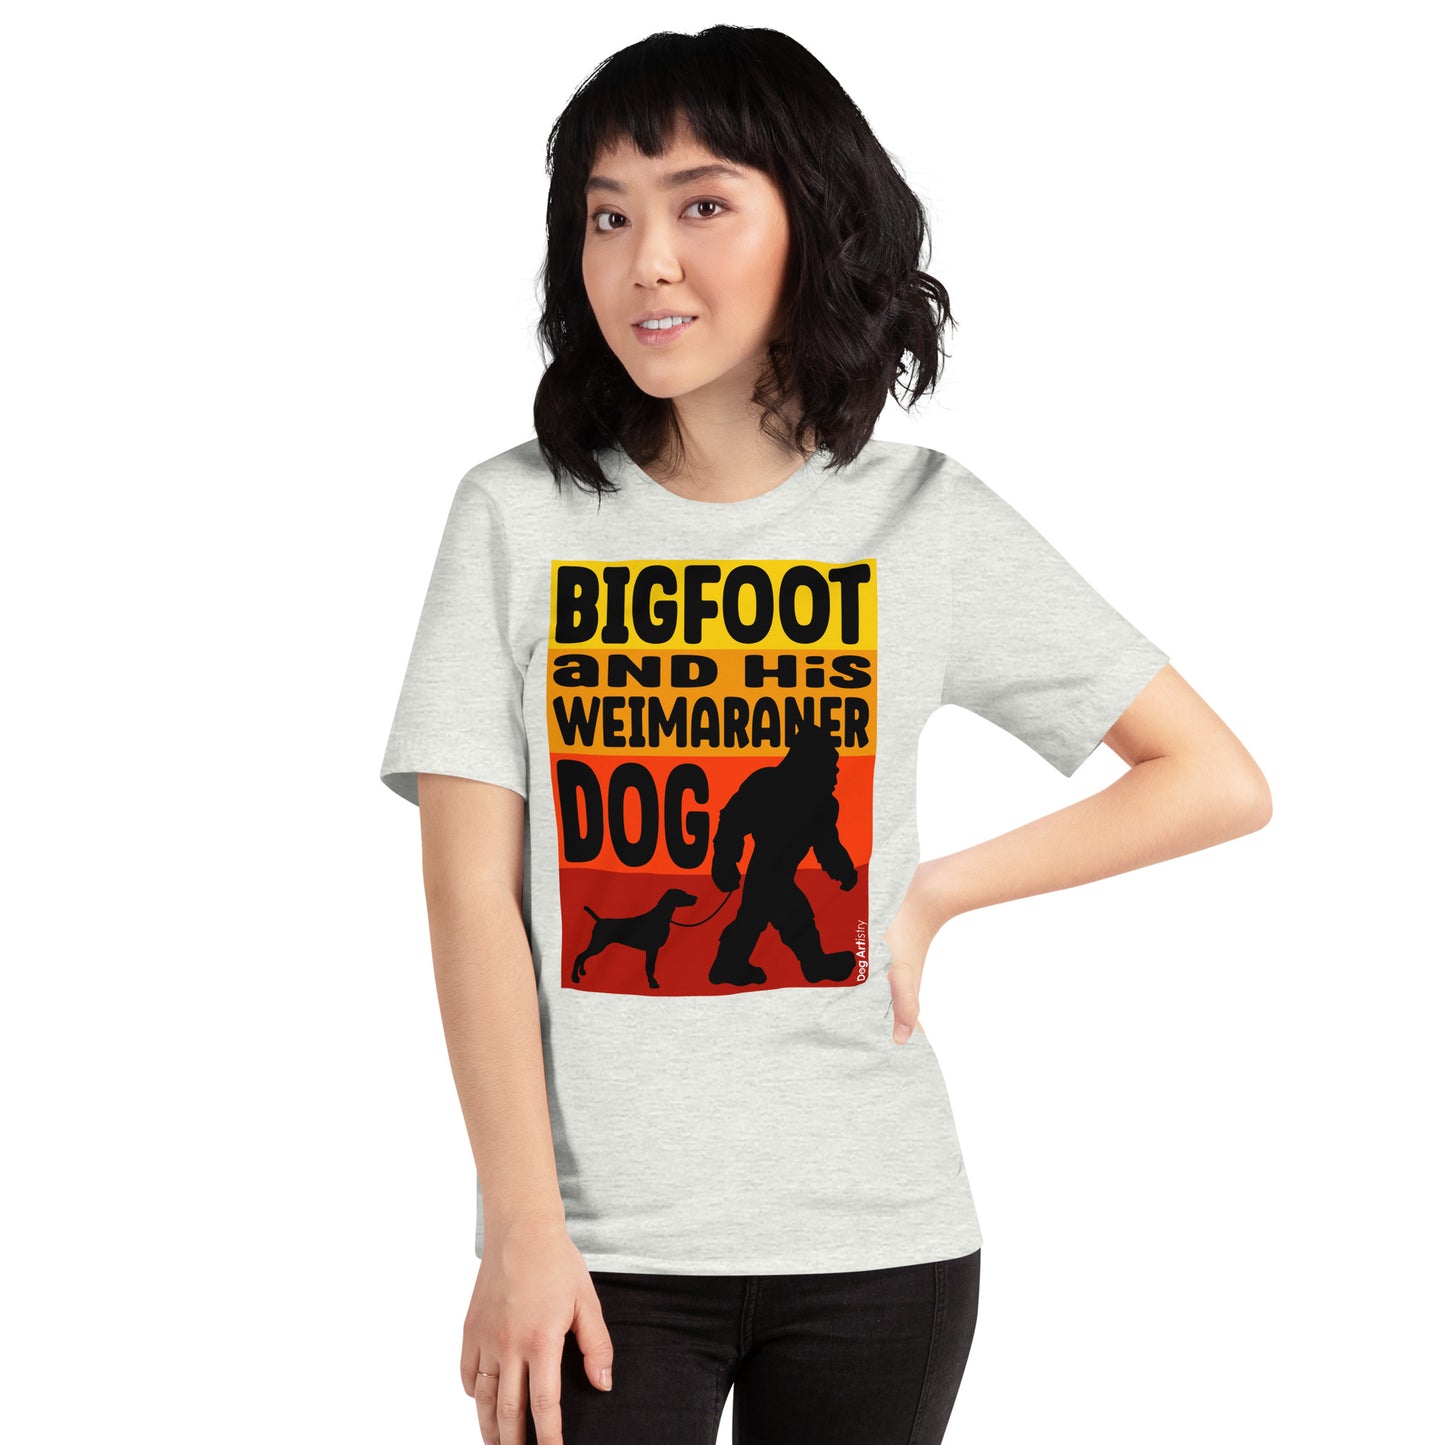 Bigfoot and his Weimaraner dog unisex ash t-shirt by Dog Artistry.